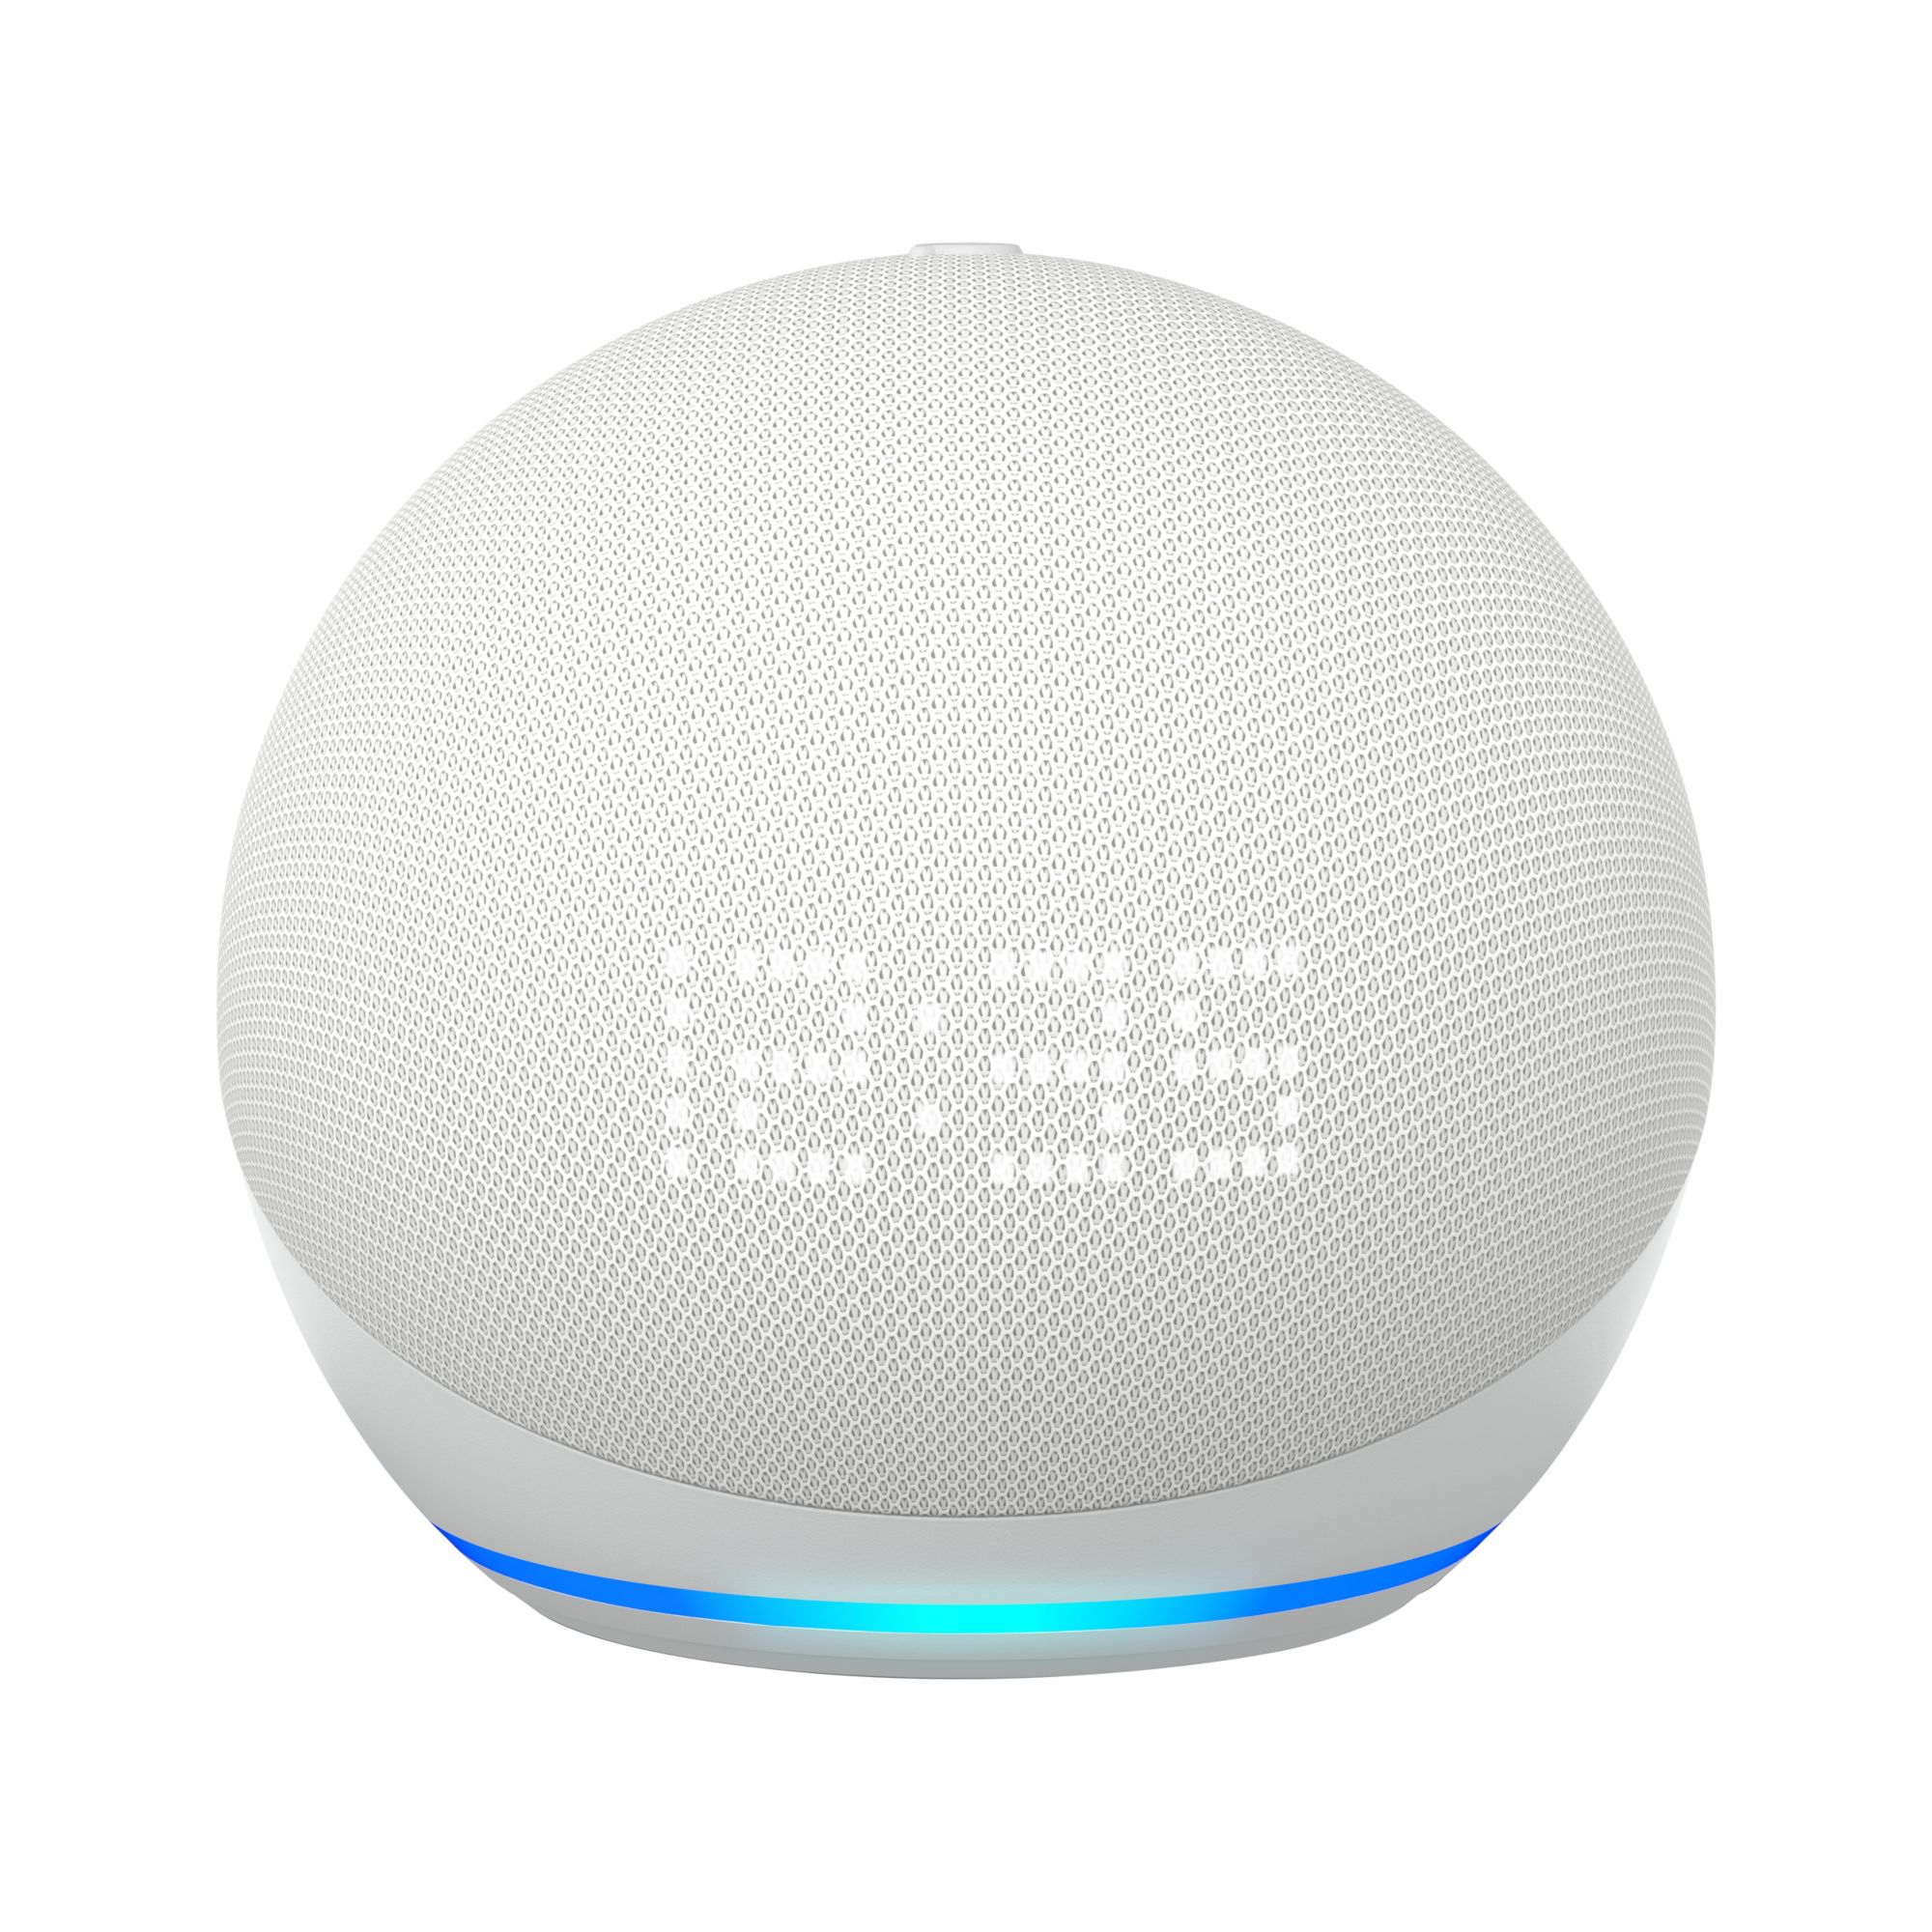 Echo Plus (2nd gen) - with smart speaker. in bulk for corporate  gifting